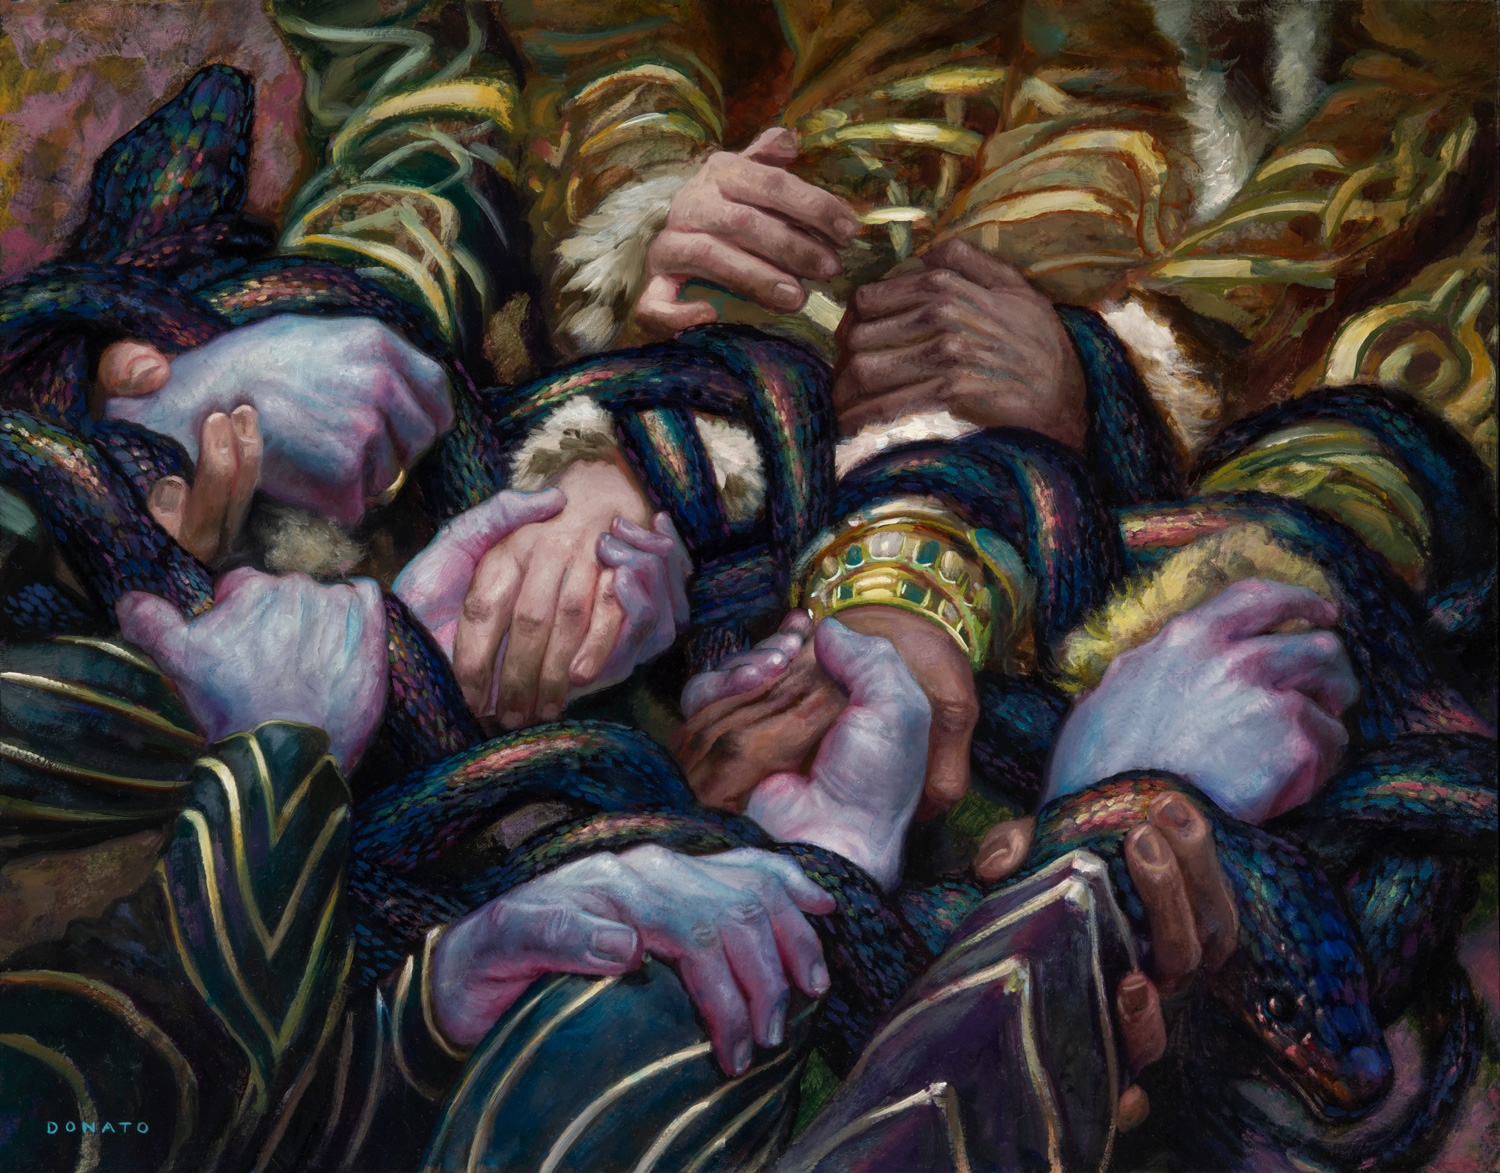 Pact Of The Serpent
Kaldheim Set release
14" x 18"  Oil on Panel
private collection
